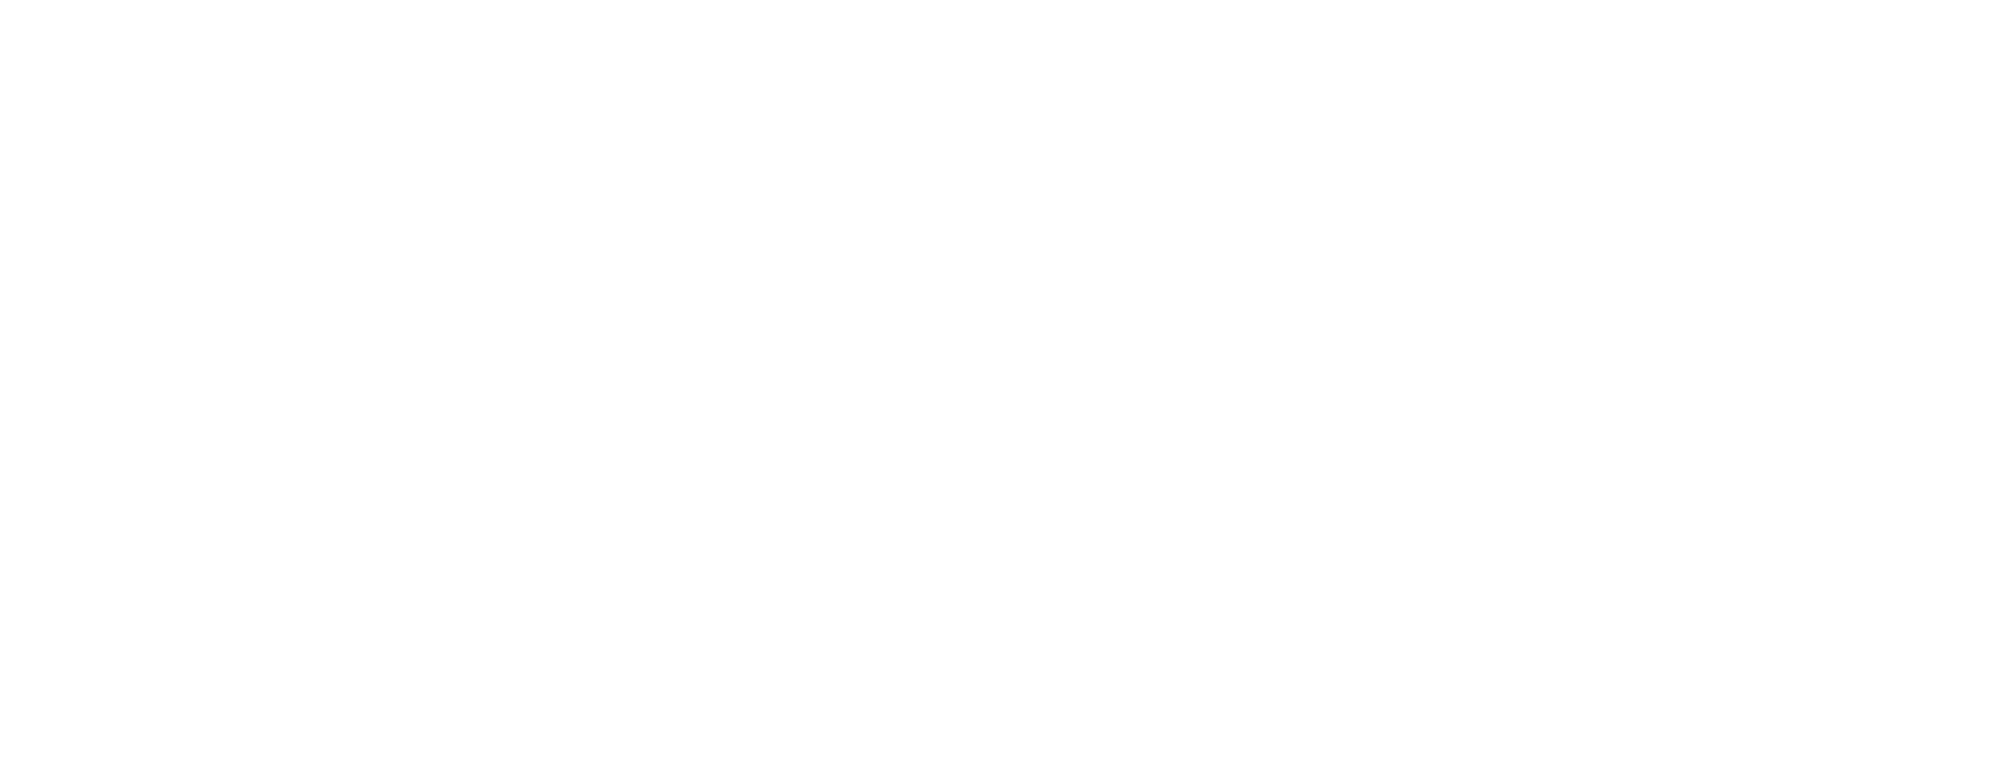 OpenFF Toolkit 0.12.0+0.g4541d472.dirty documentation logo